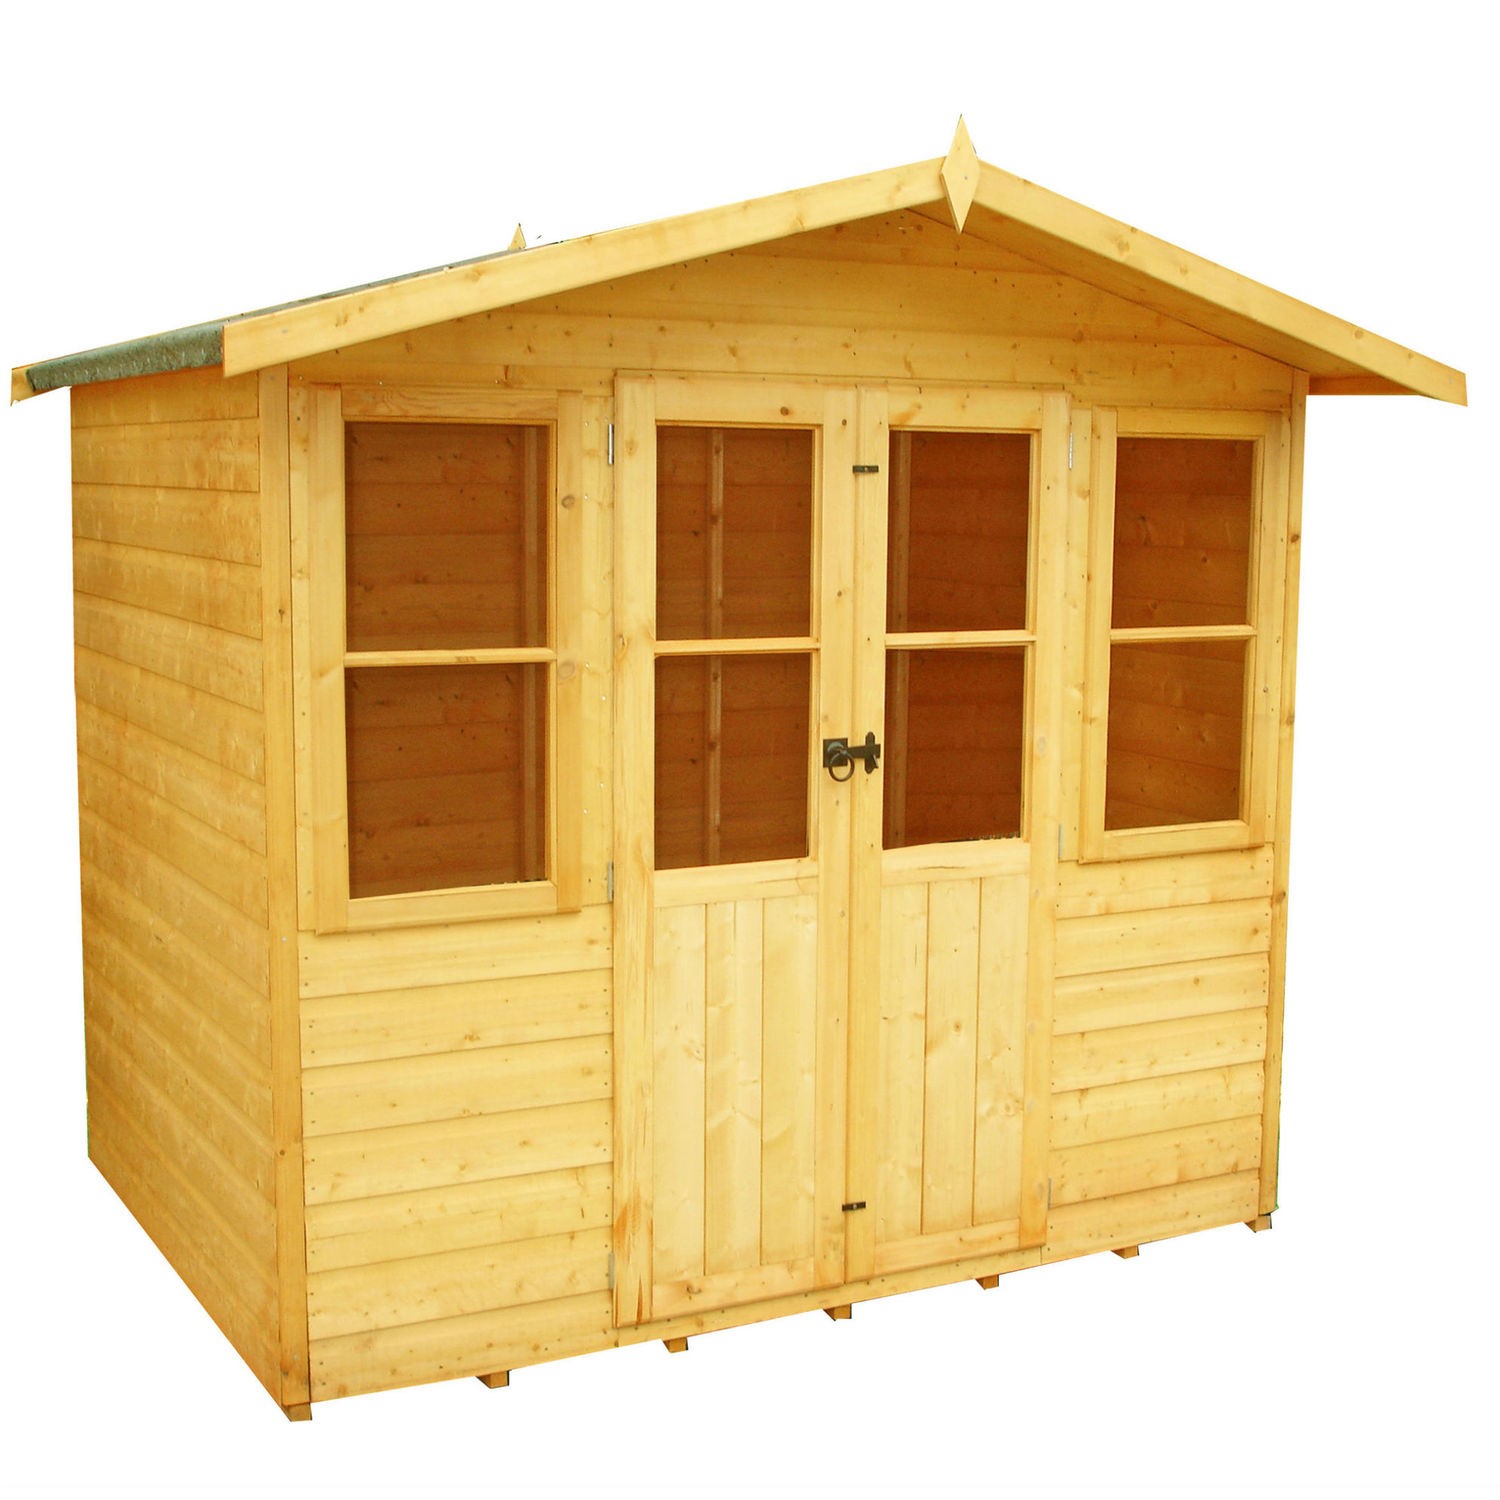 Read more about Shire haddon wooden garden summerhouse 7 x 5ft